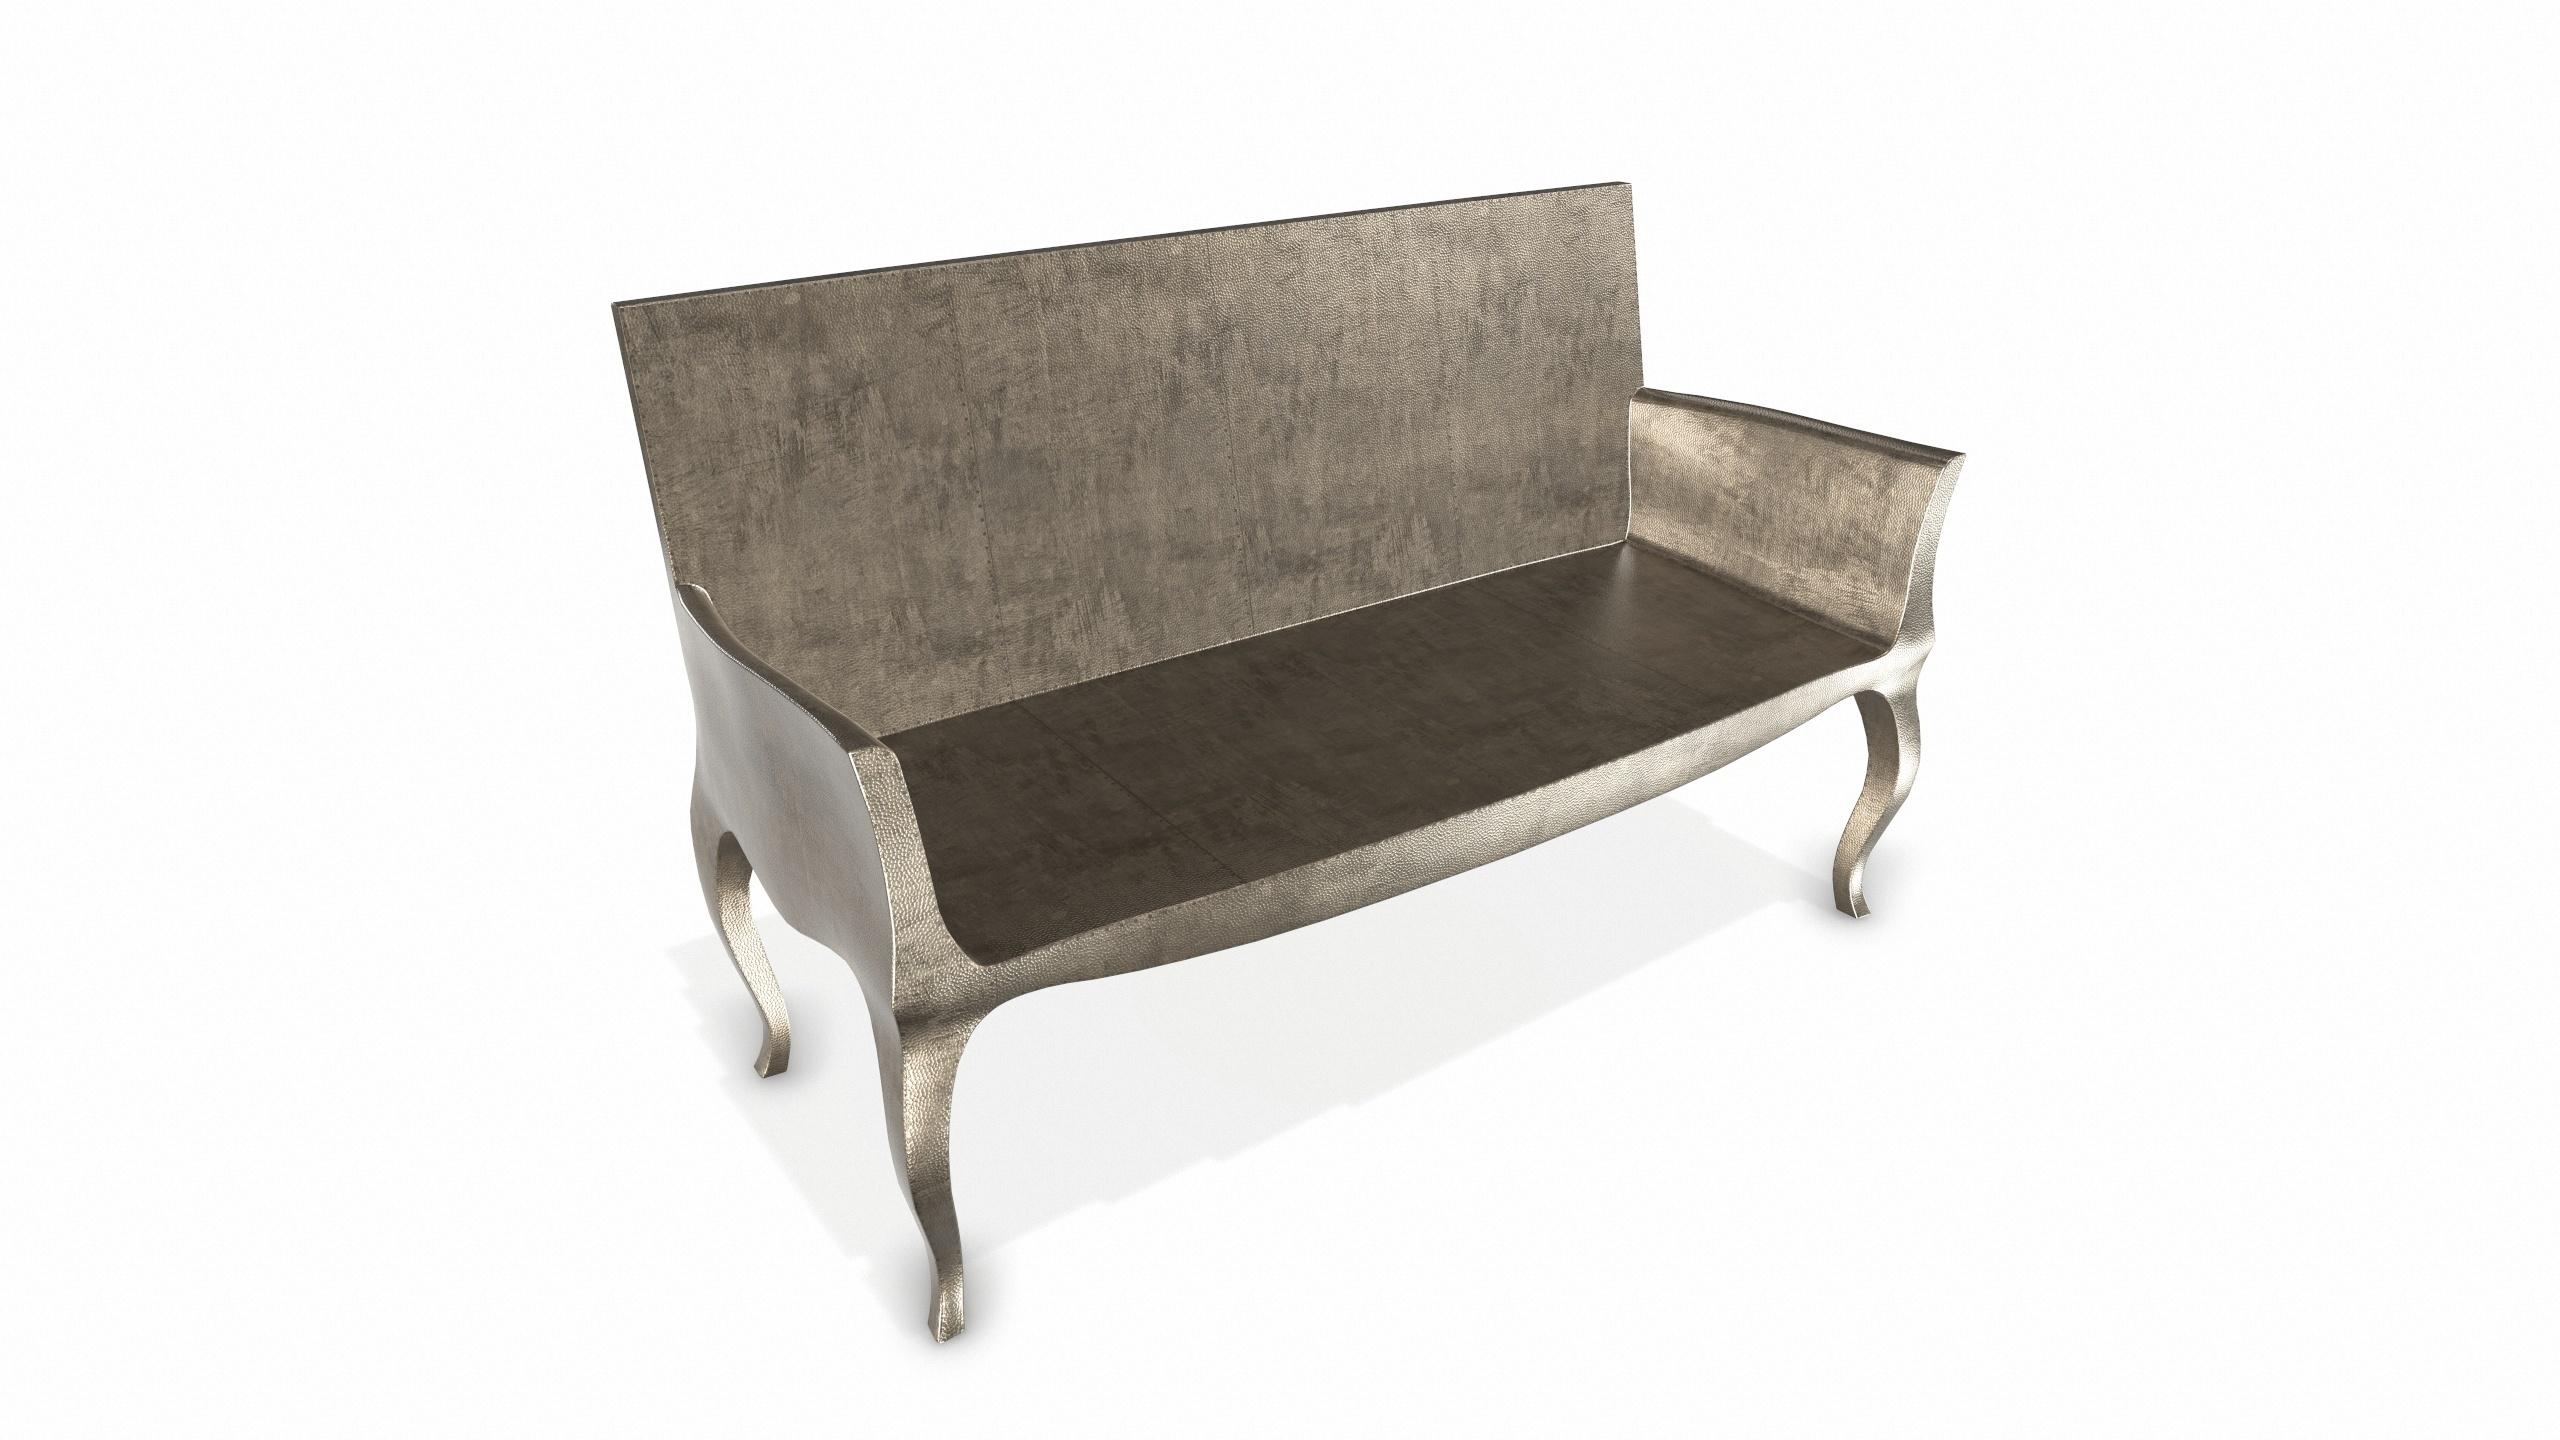 Louise Settee Art Deco Benches in Mid. Hammered Antique Bronze by Paul Mathieu For Sale 2